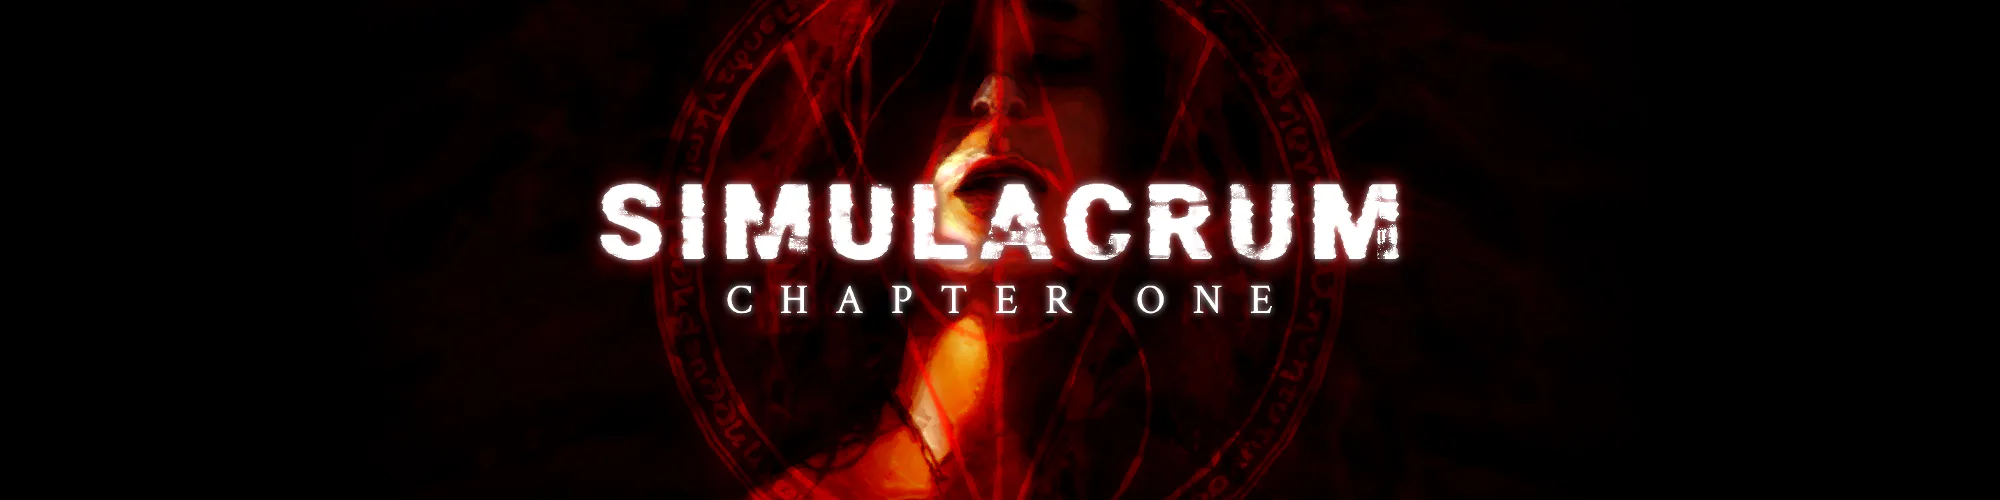 Simulacrum Chapter One